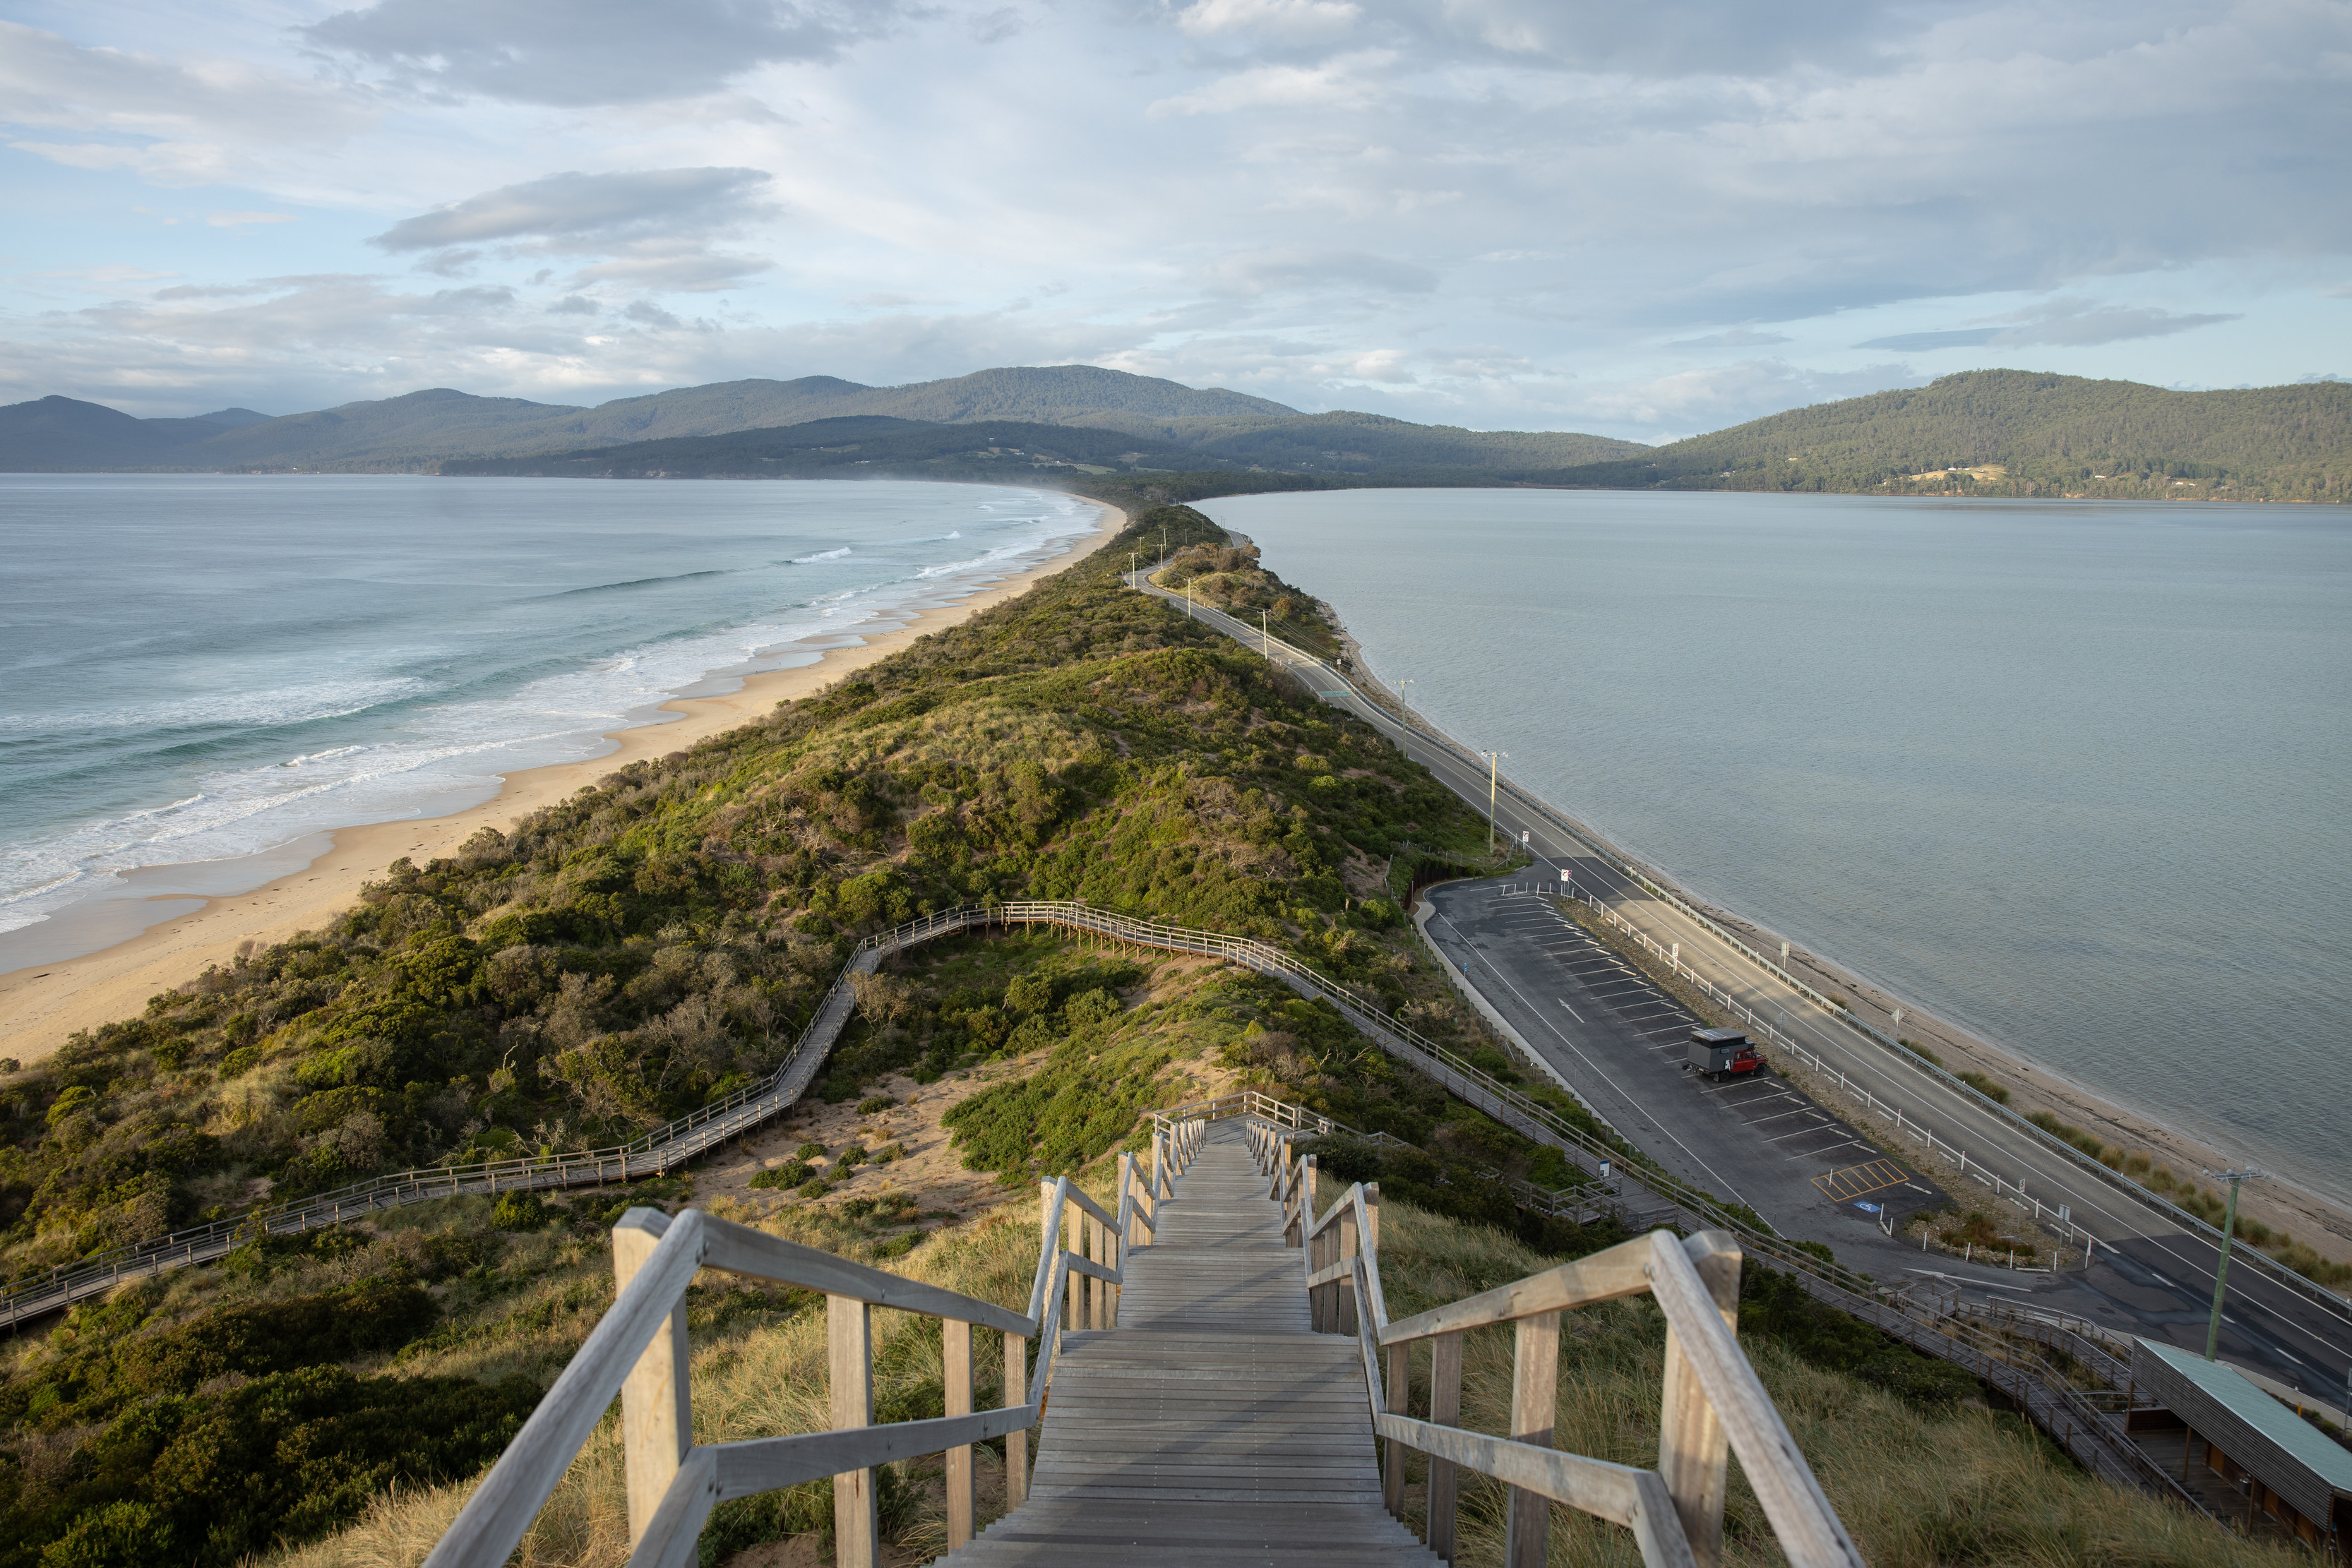 Breathtaking image of Bruny Island Neck, An isthmus of land connecting north and south Bruny Island. Taken from the top of a path.